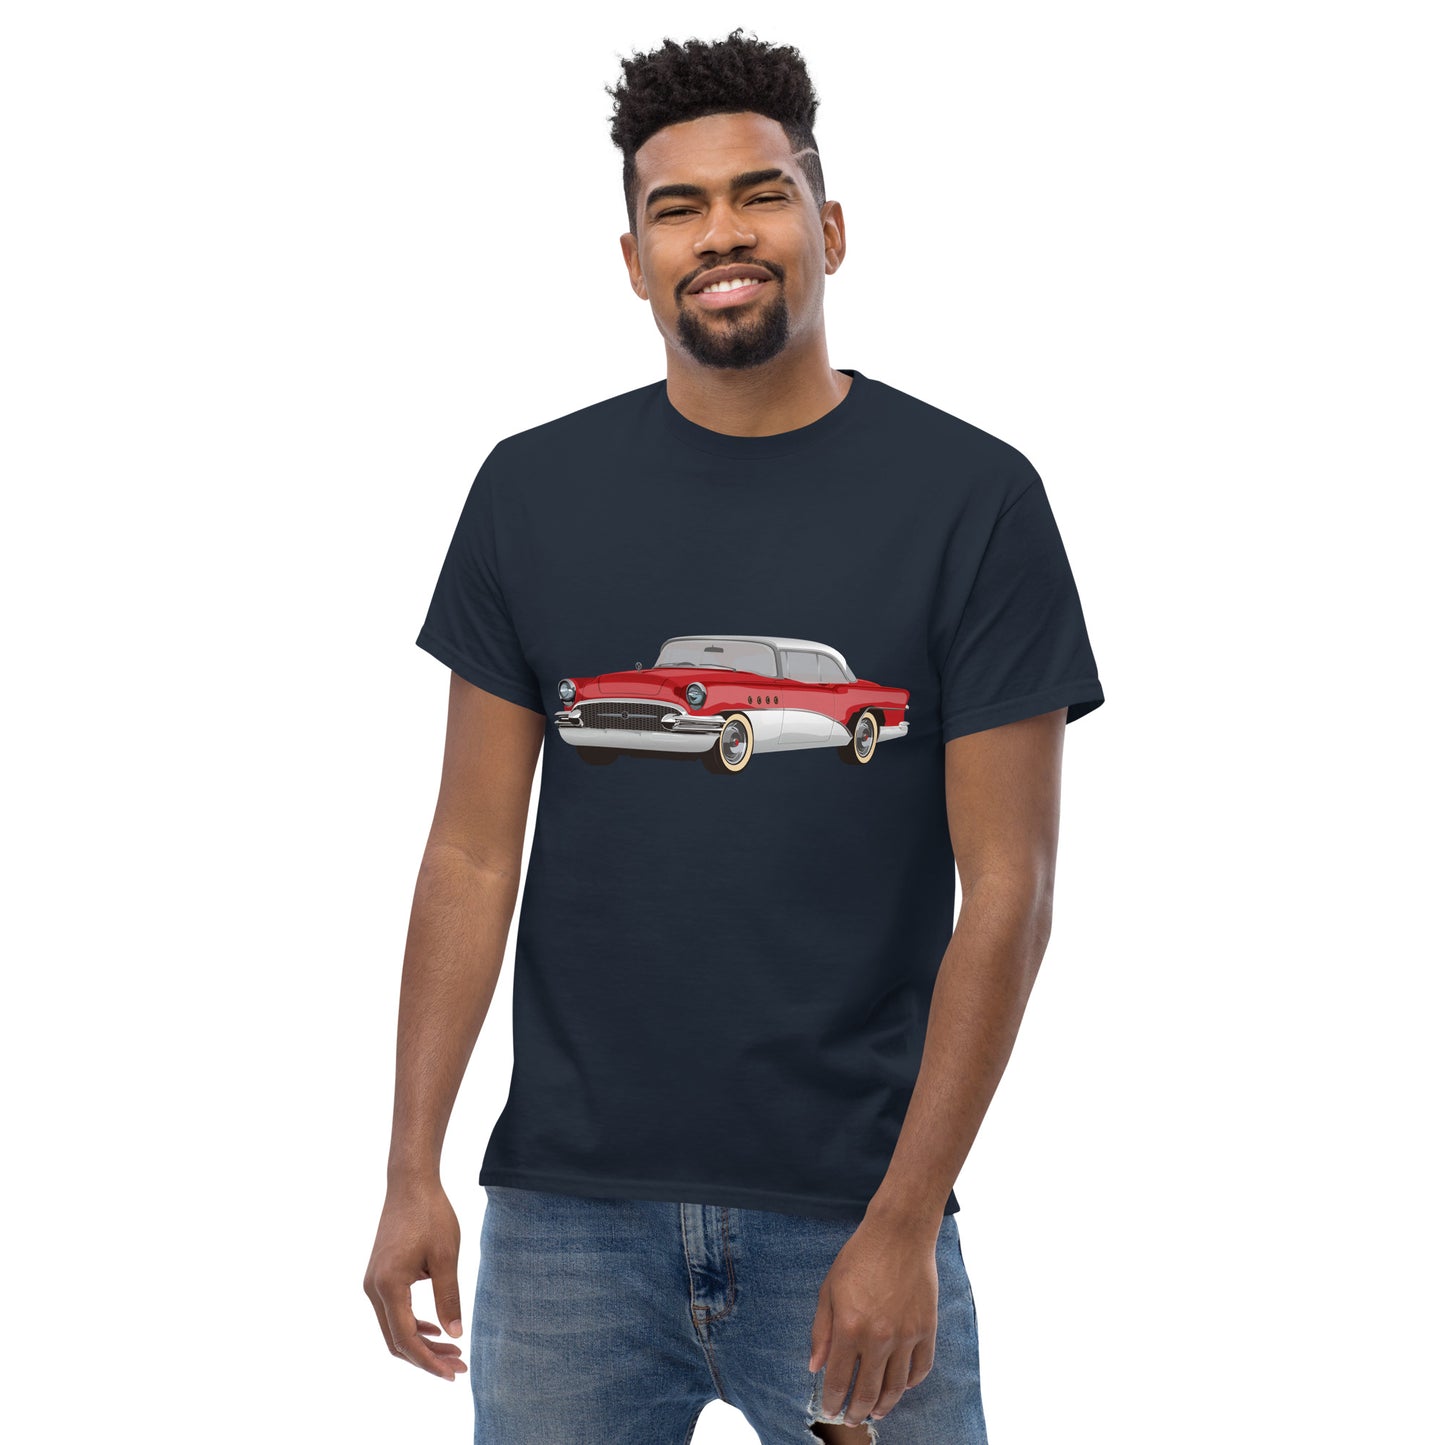 Men with navy blue t-shirt with red Chevrolet 